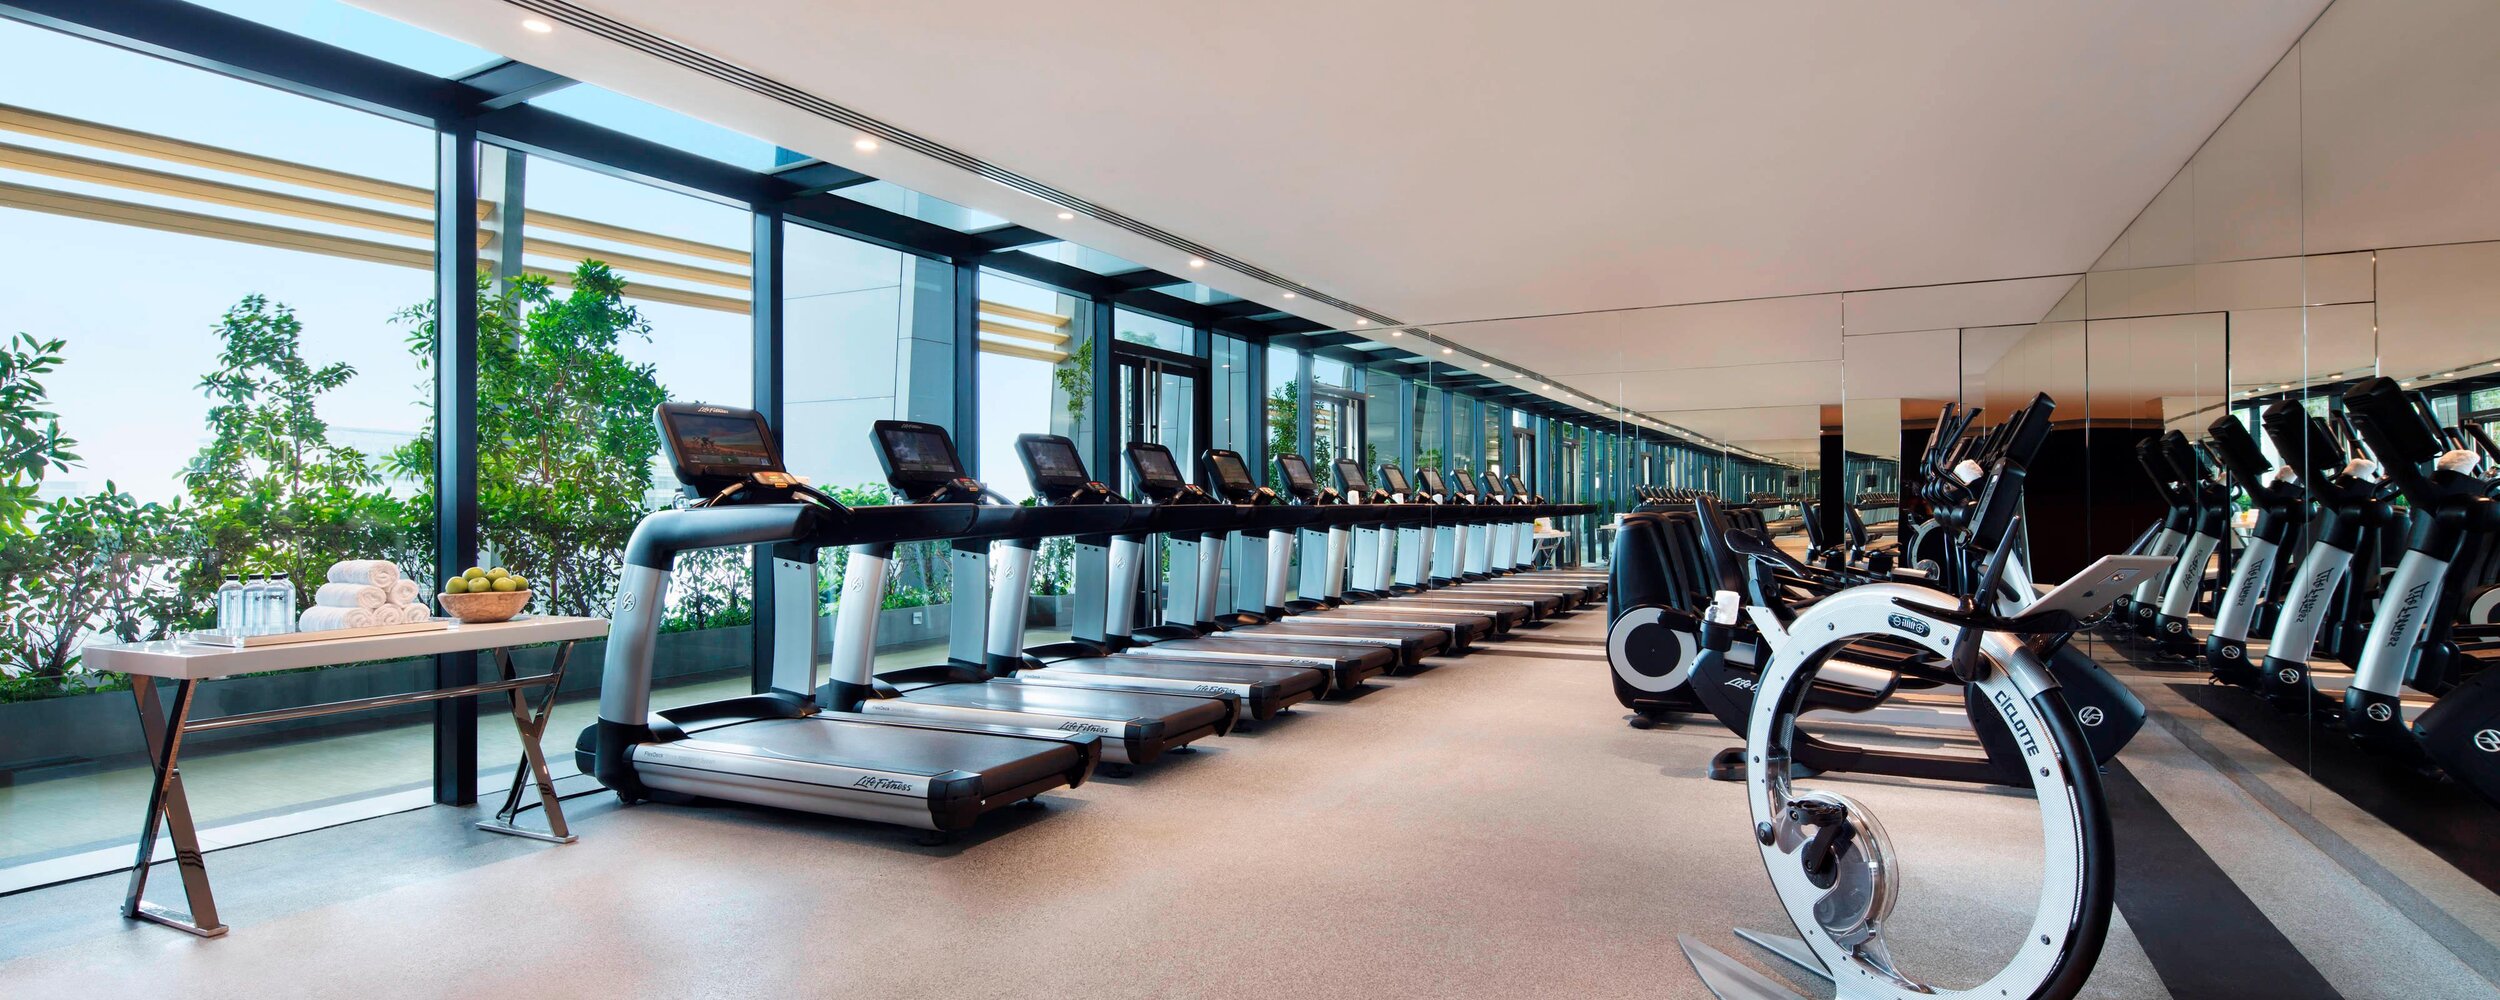 The 10 Best Hotel Gyms in Singapore - Fittest Travel